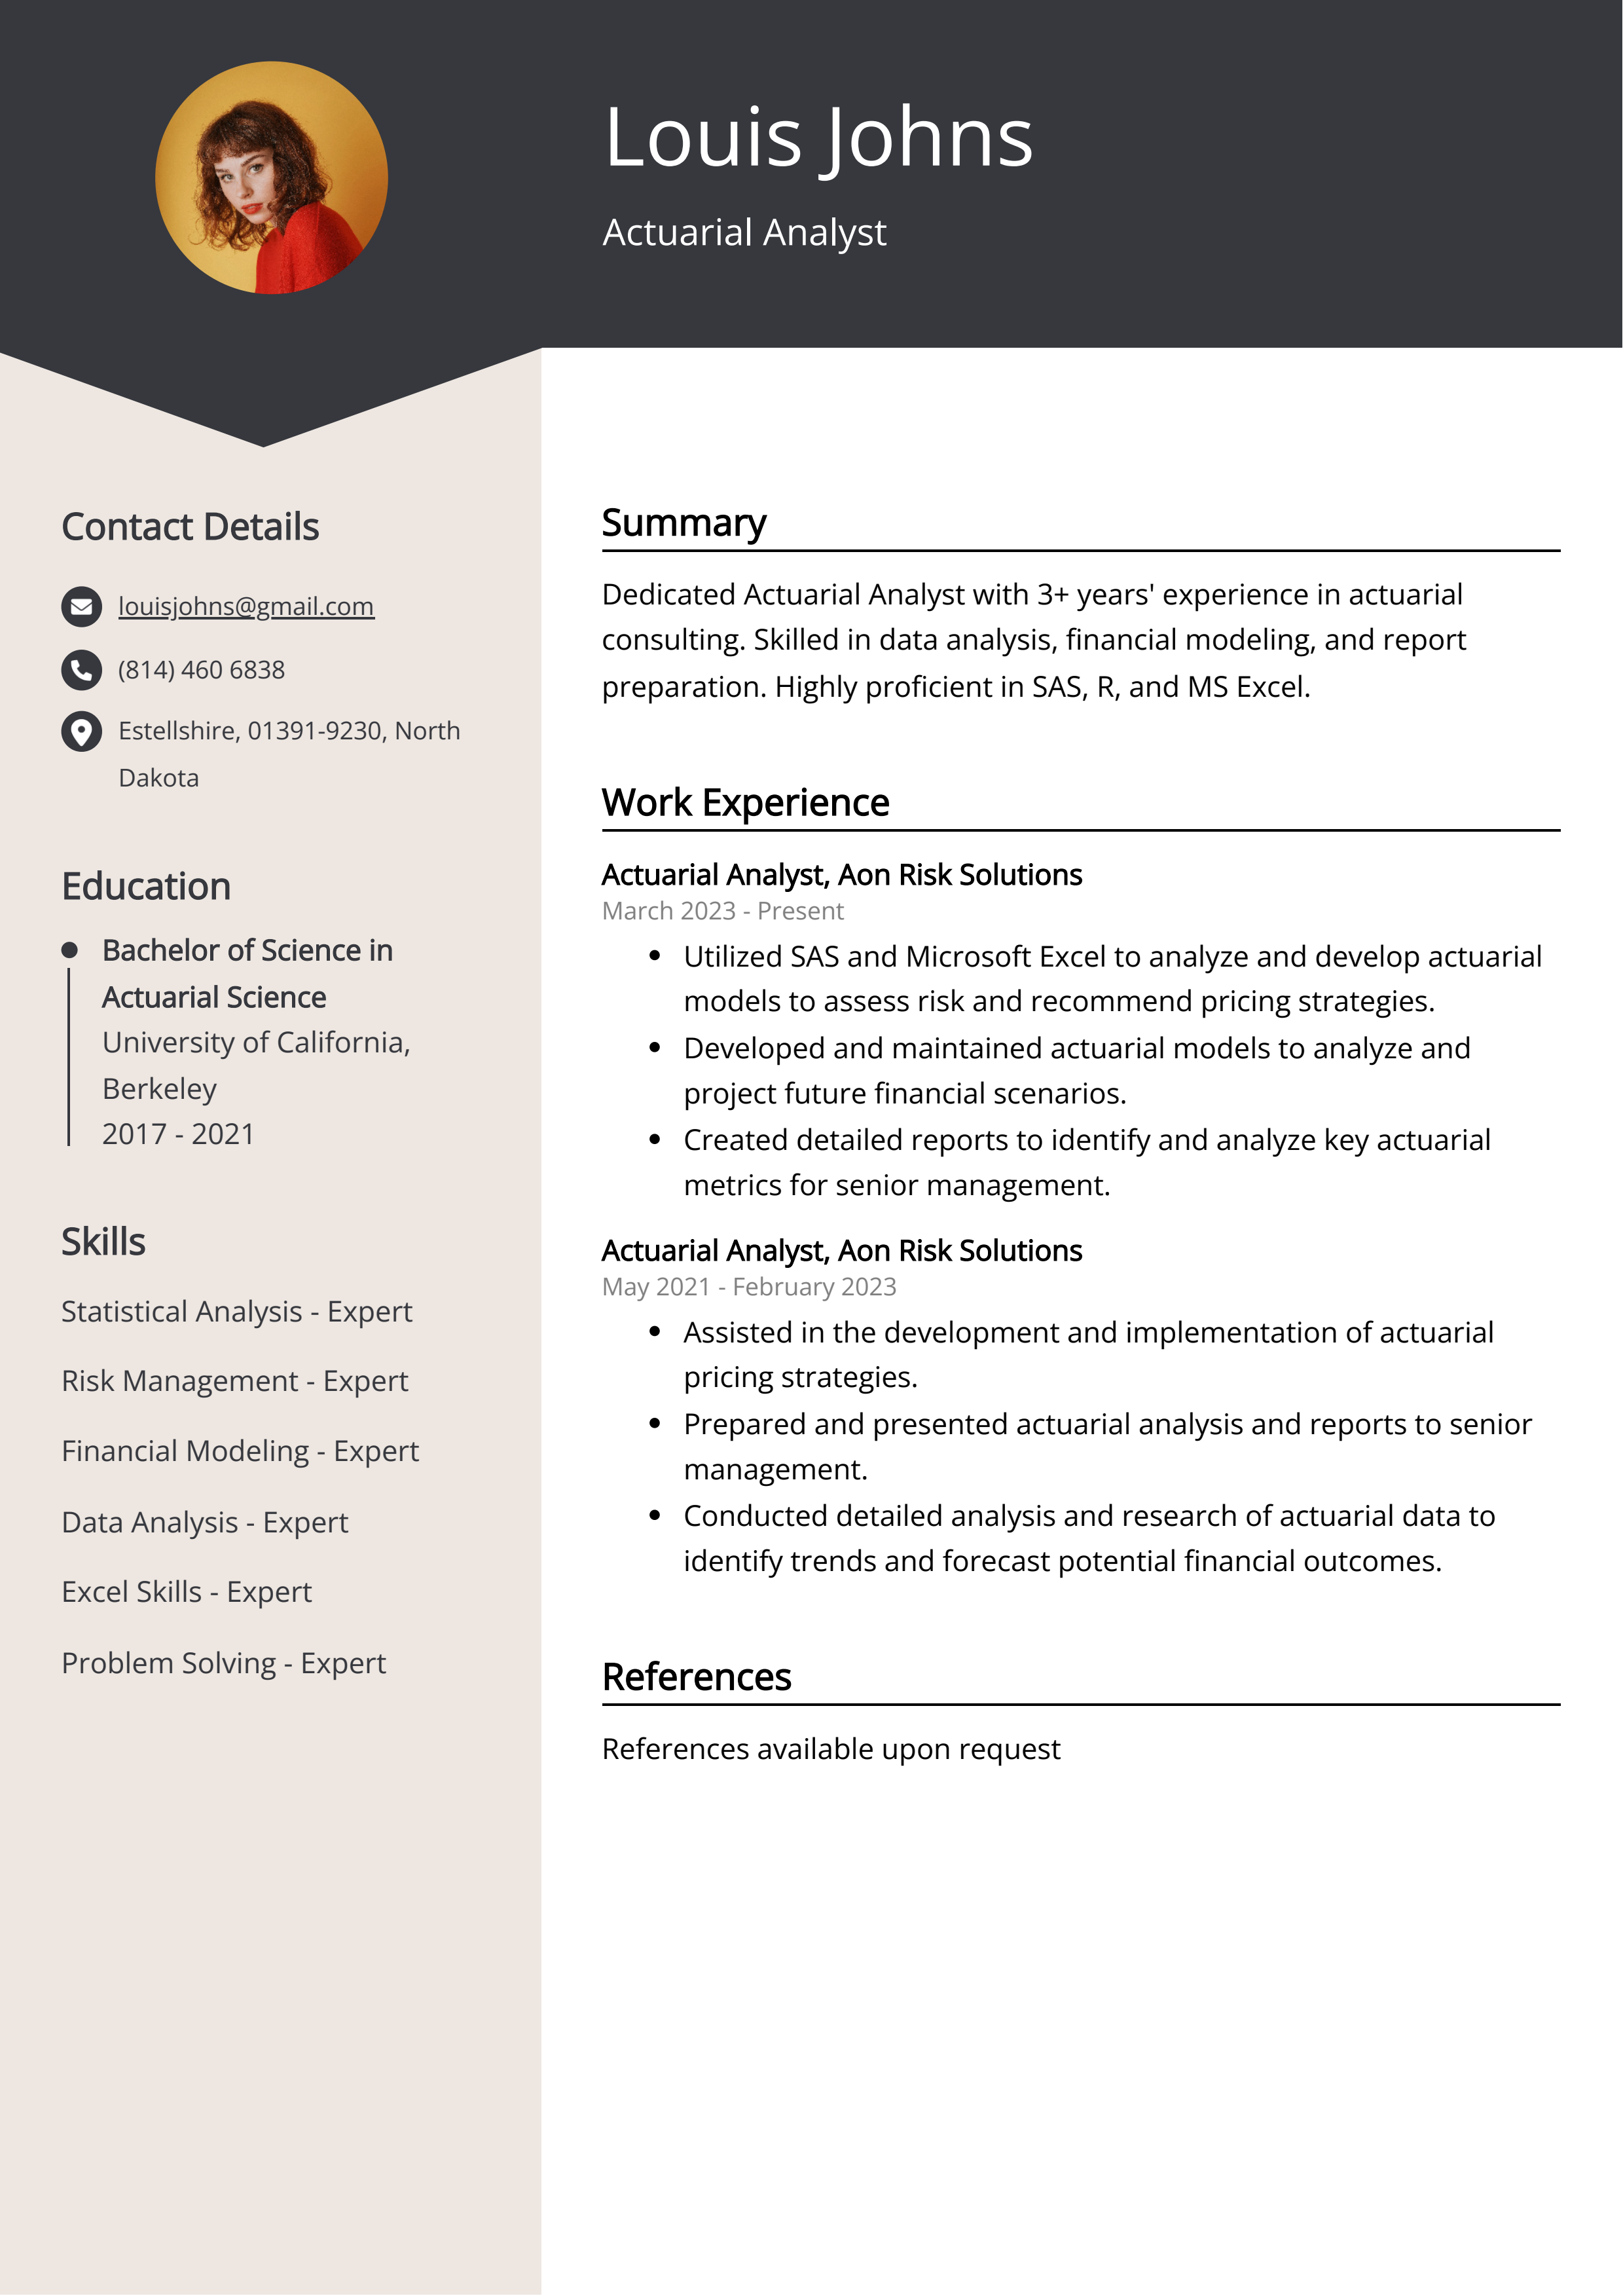 Actuarial Analyst CV Example